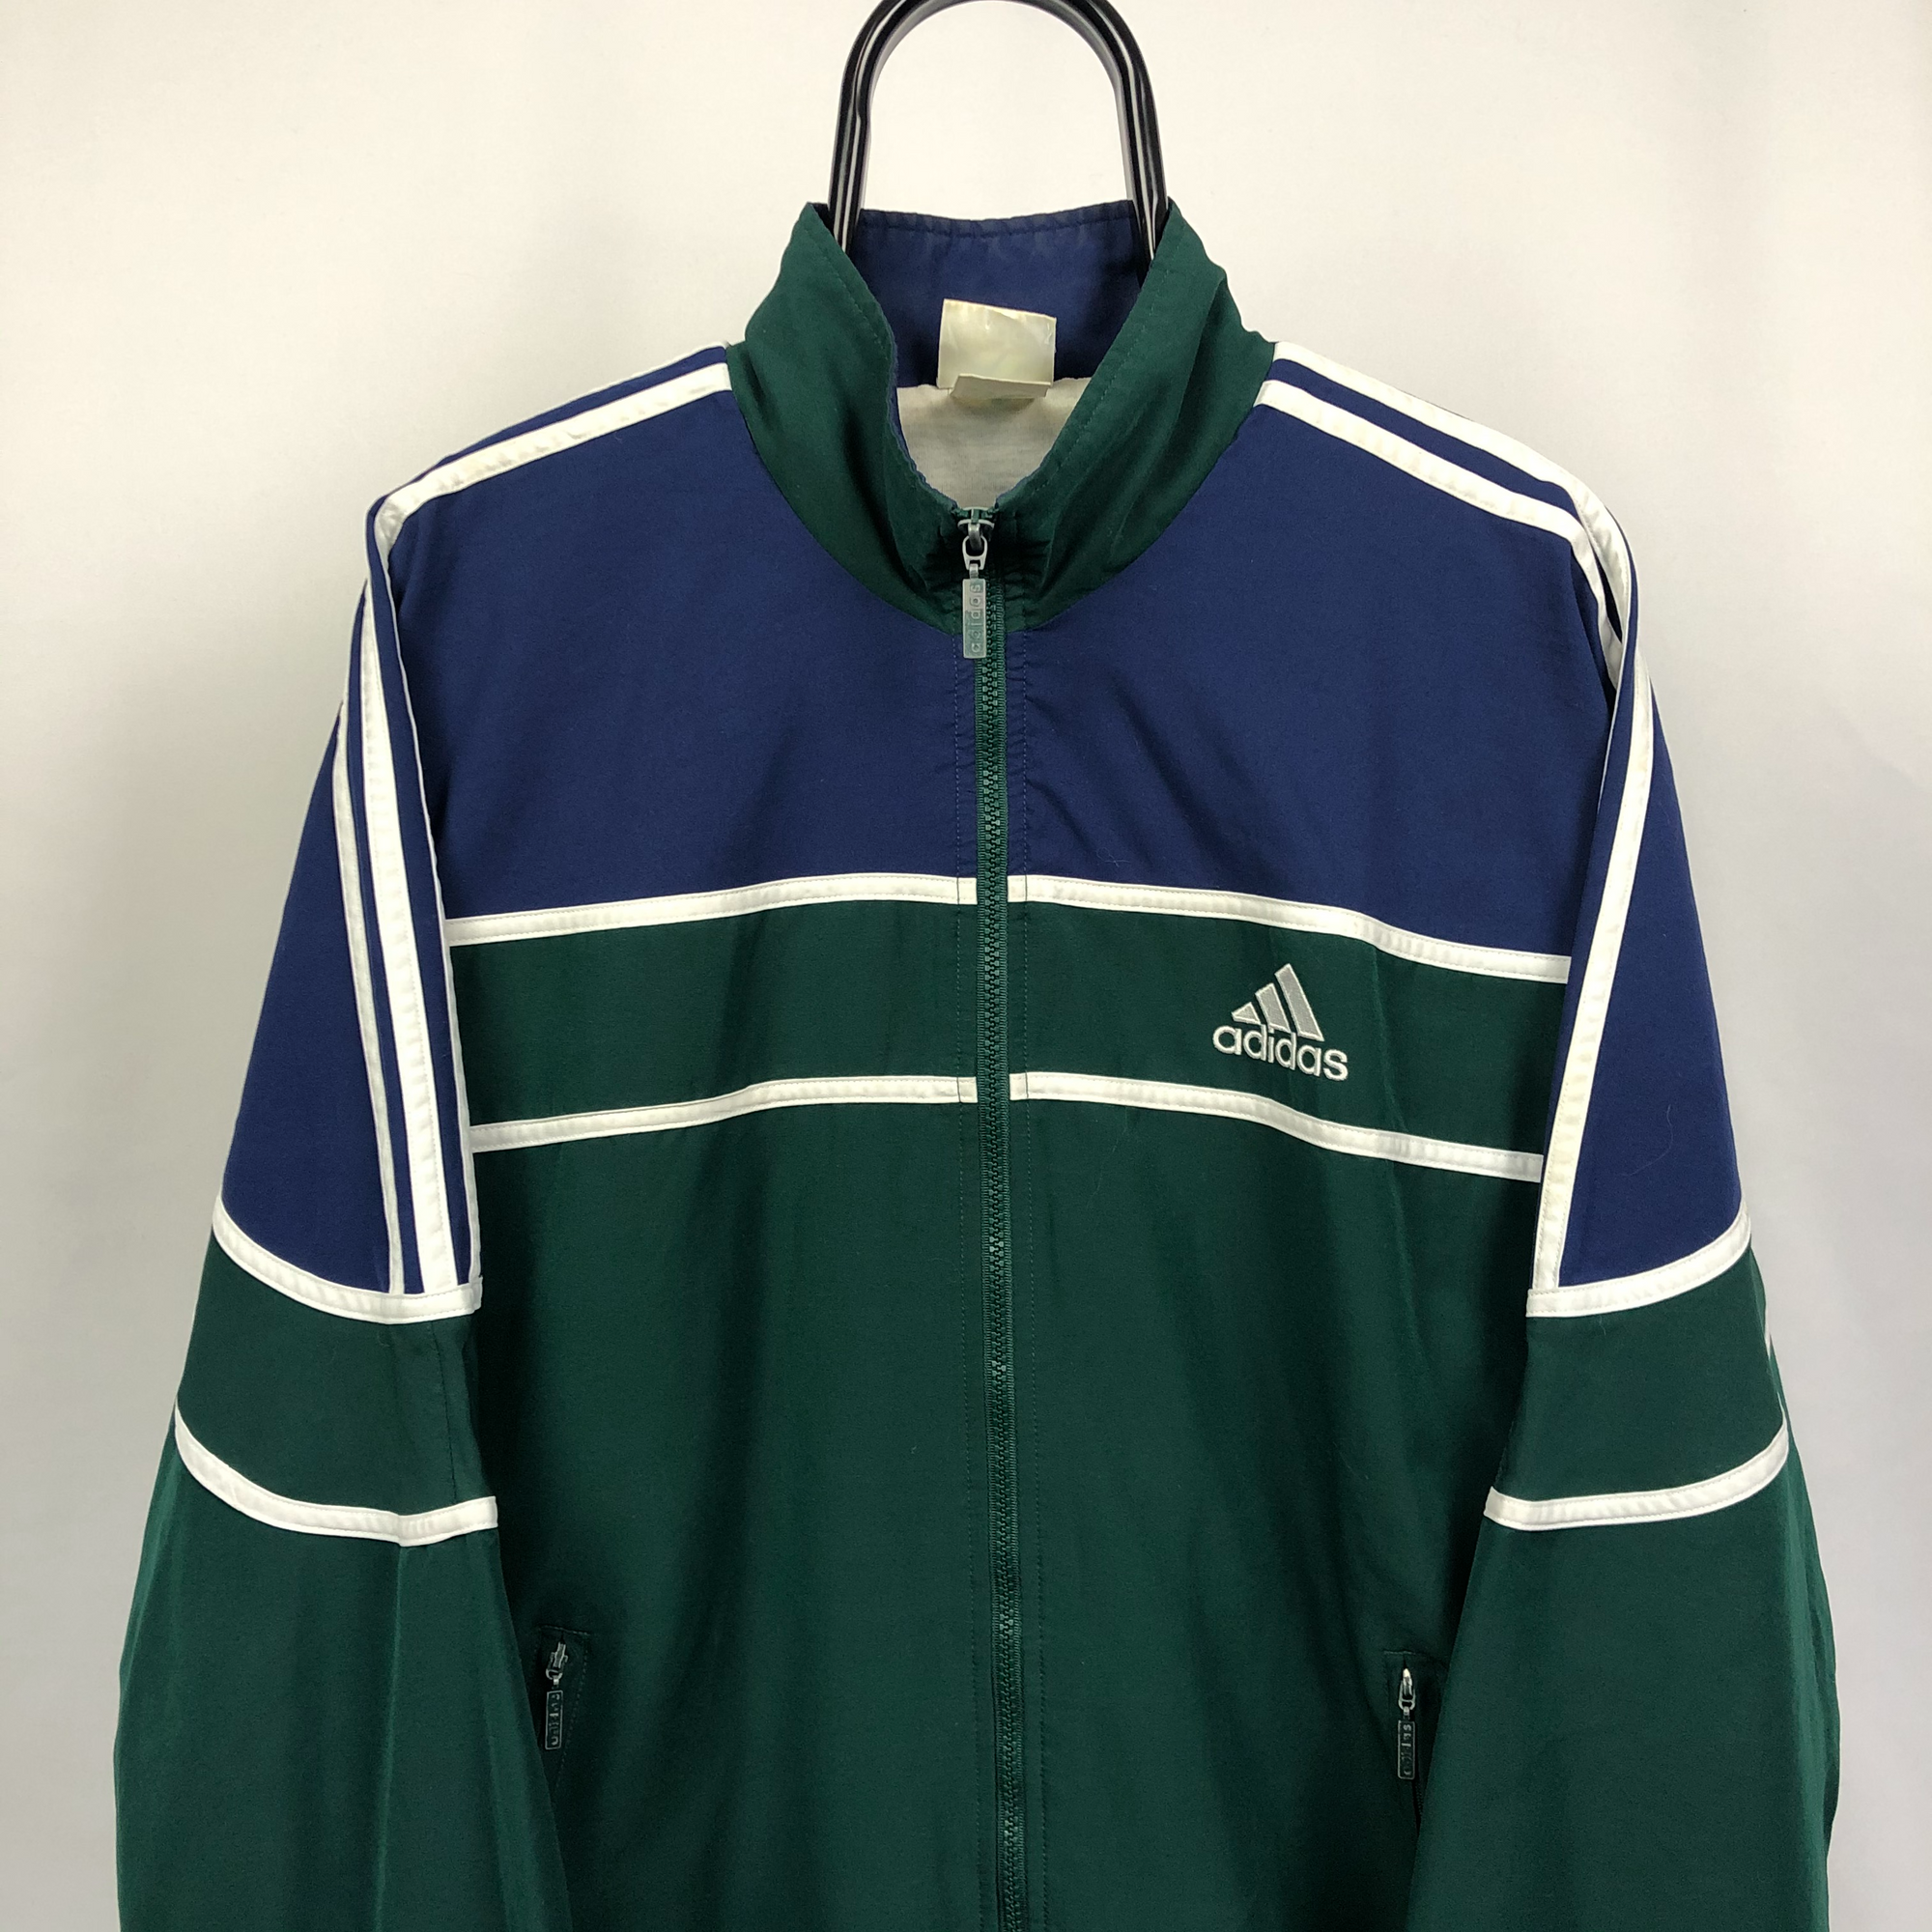 Vintage 90s Adidas Track Jacket in Green/Navy - Men's Large/Women's XL